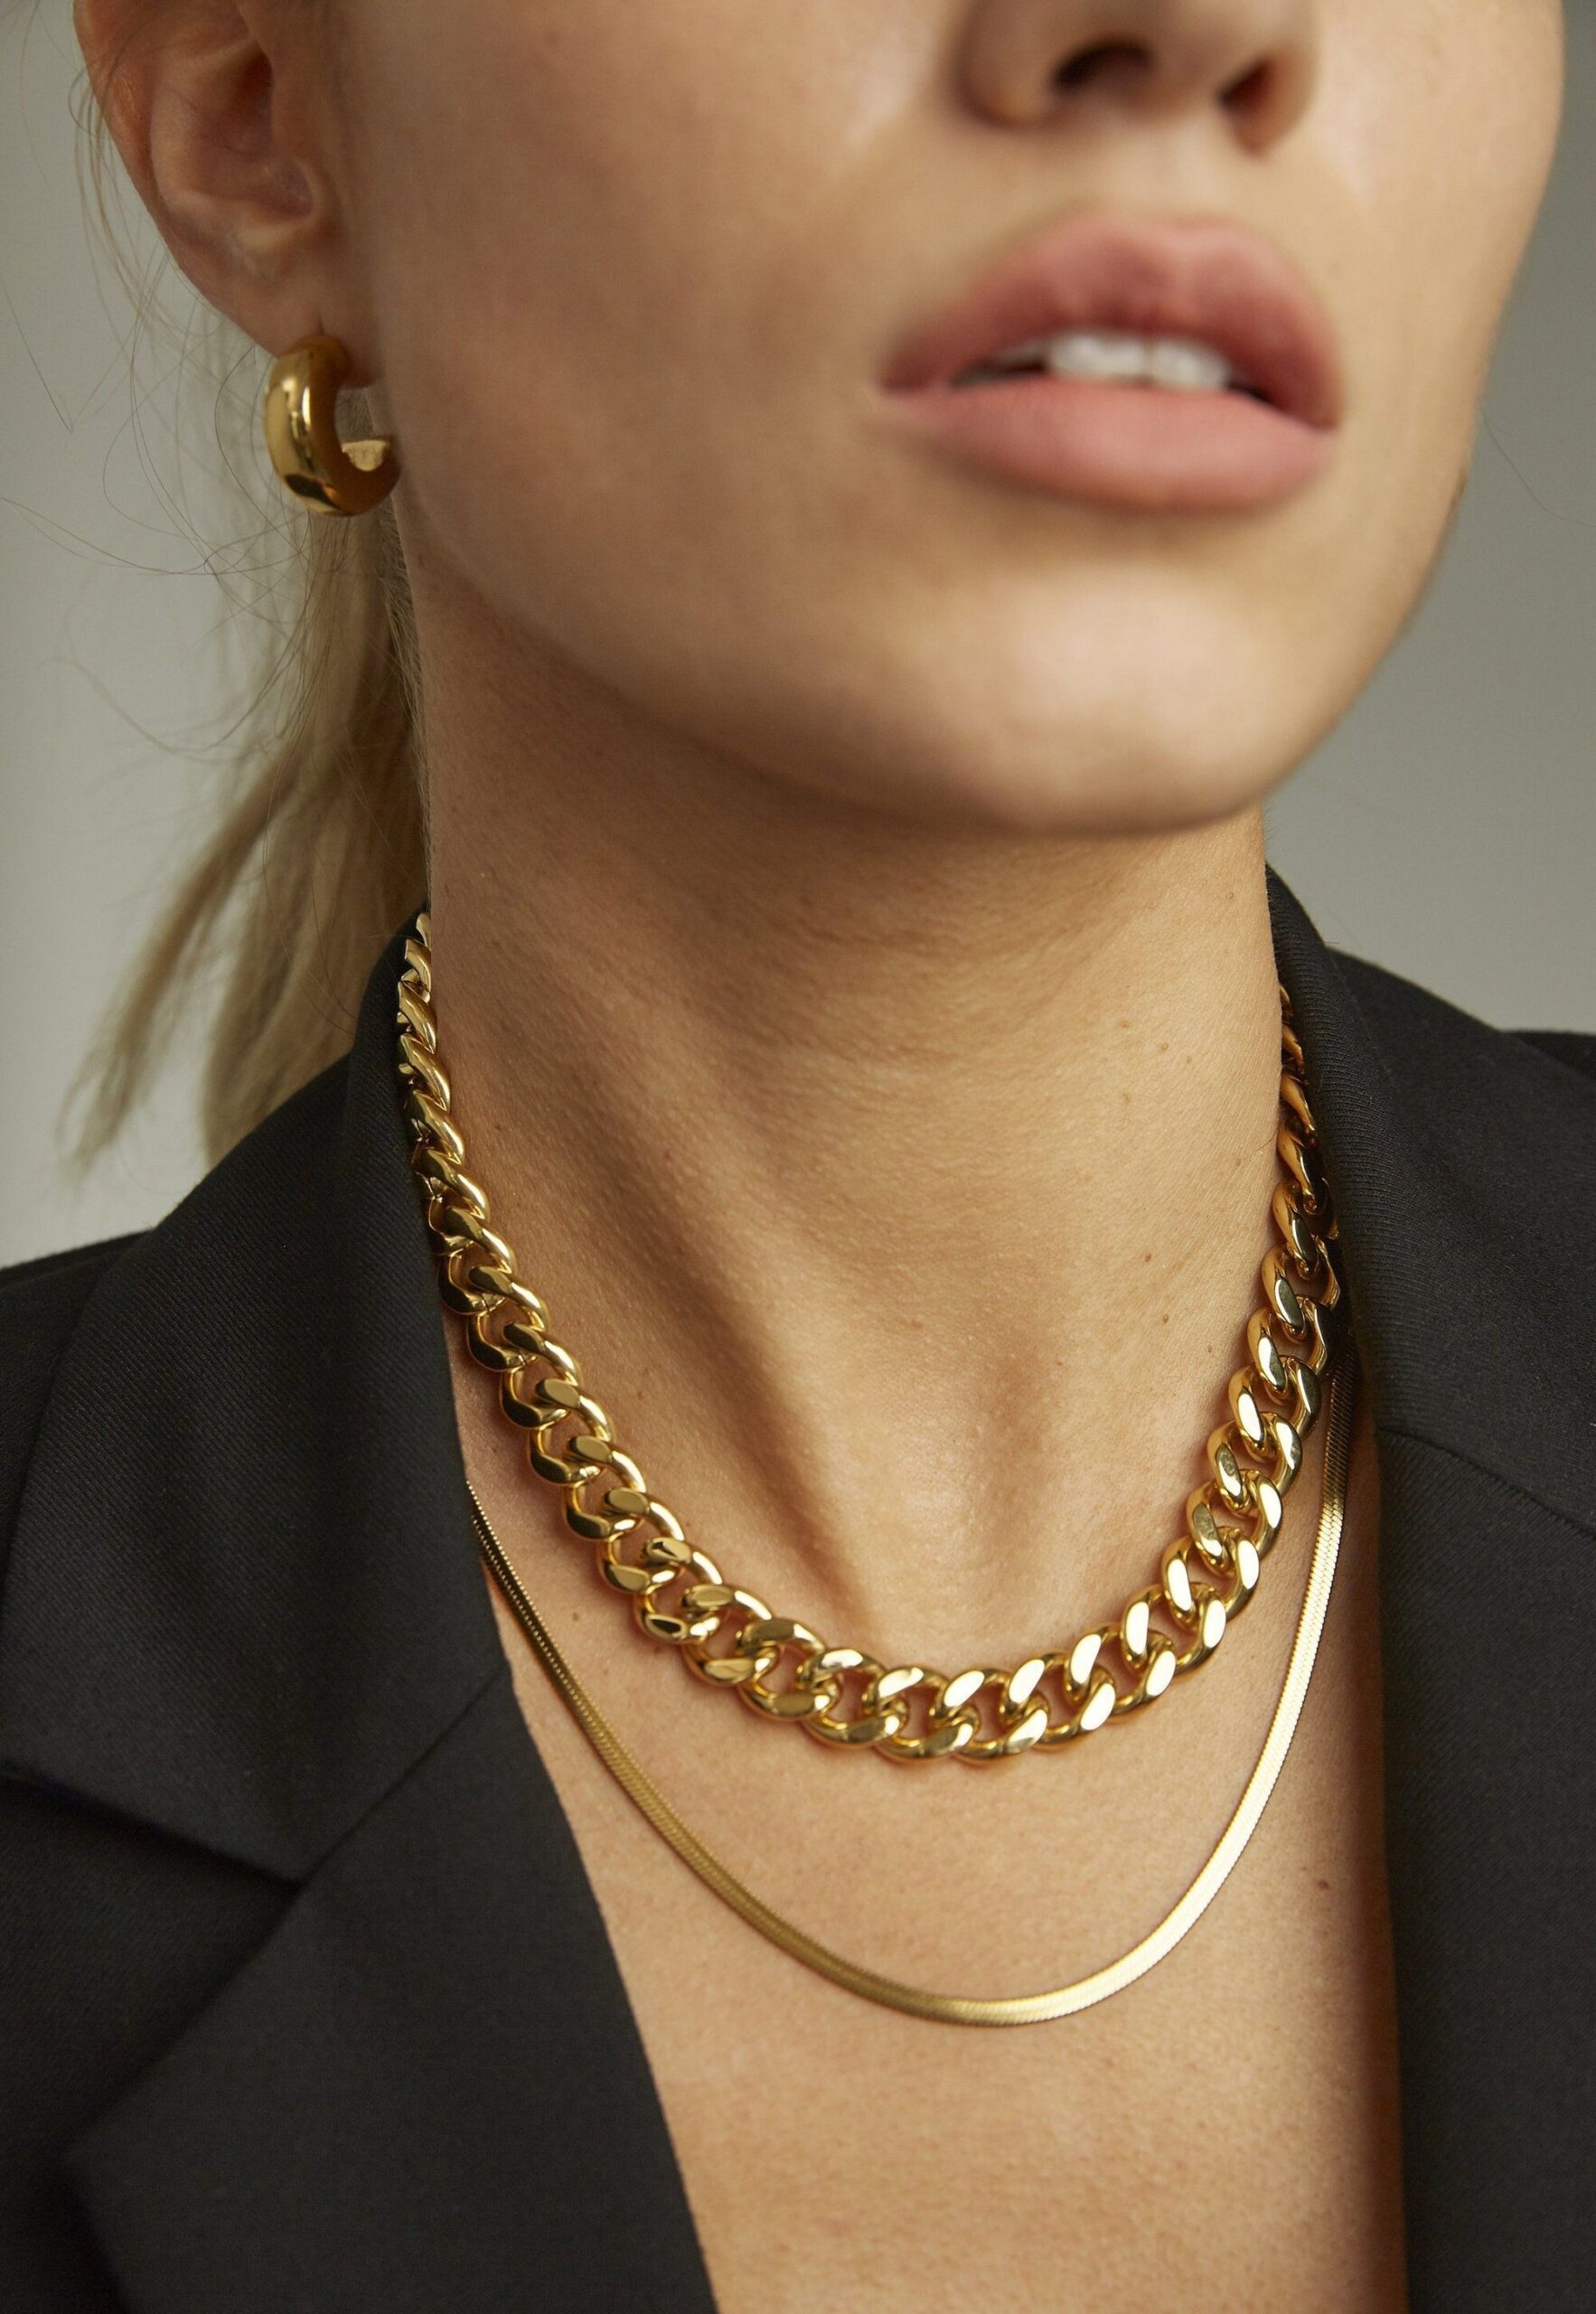 Gold Chain Designs: Classic Elegance and Versatility in Jewelry